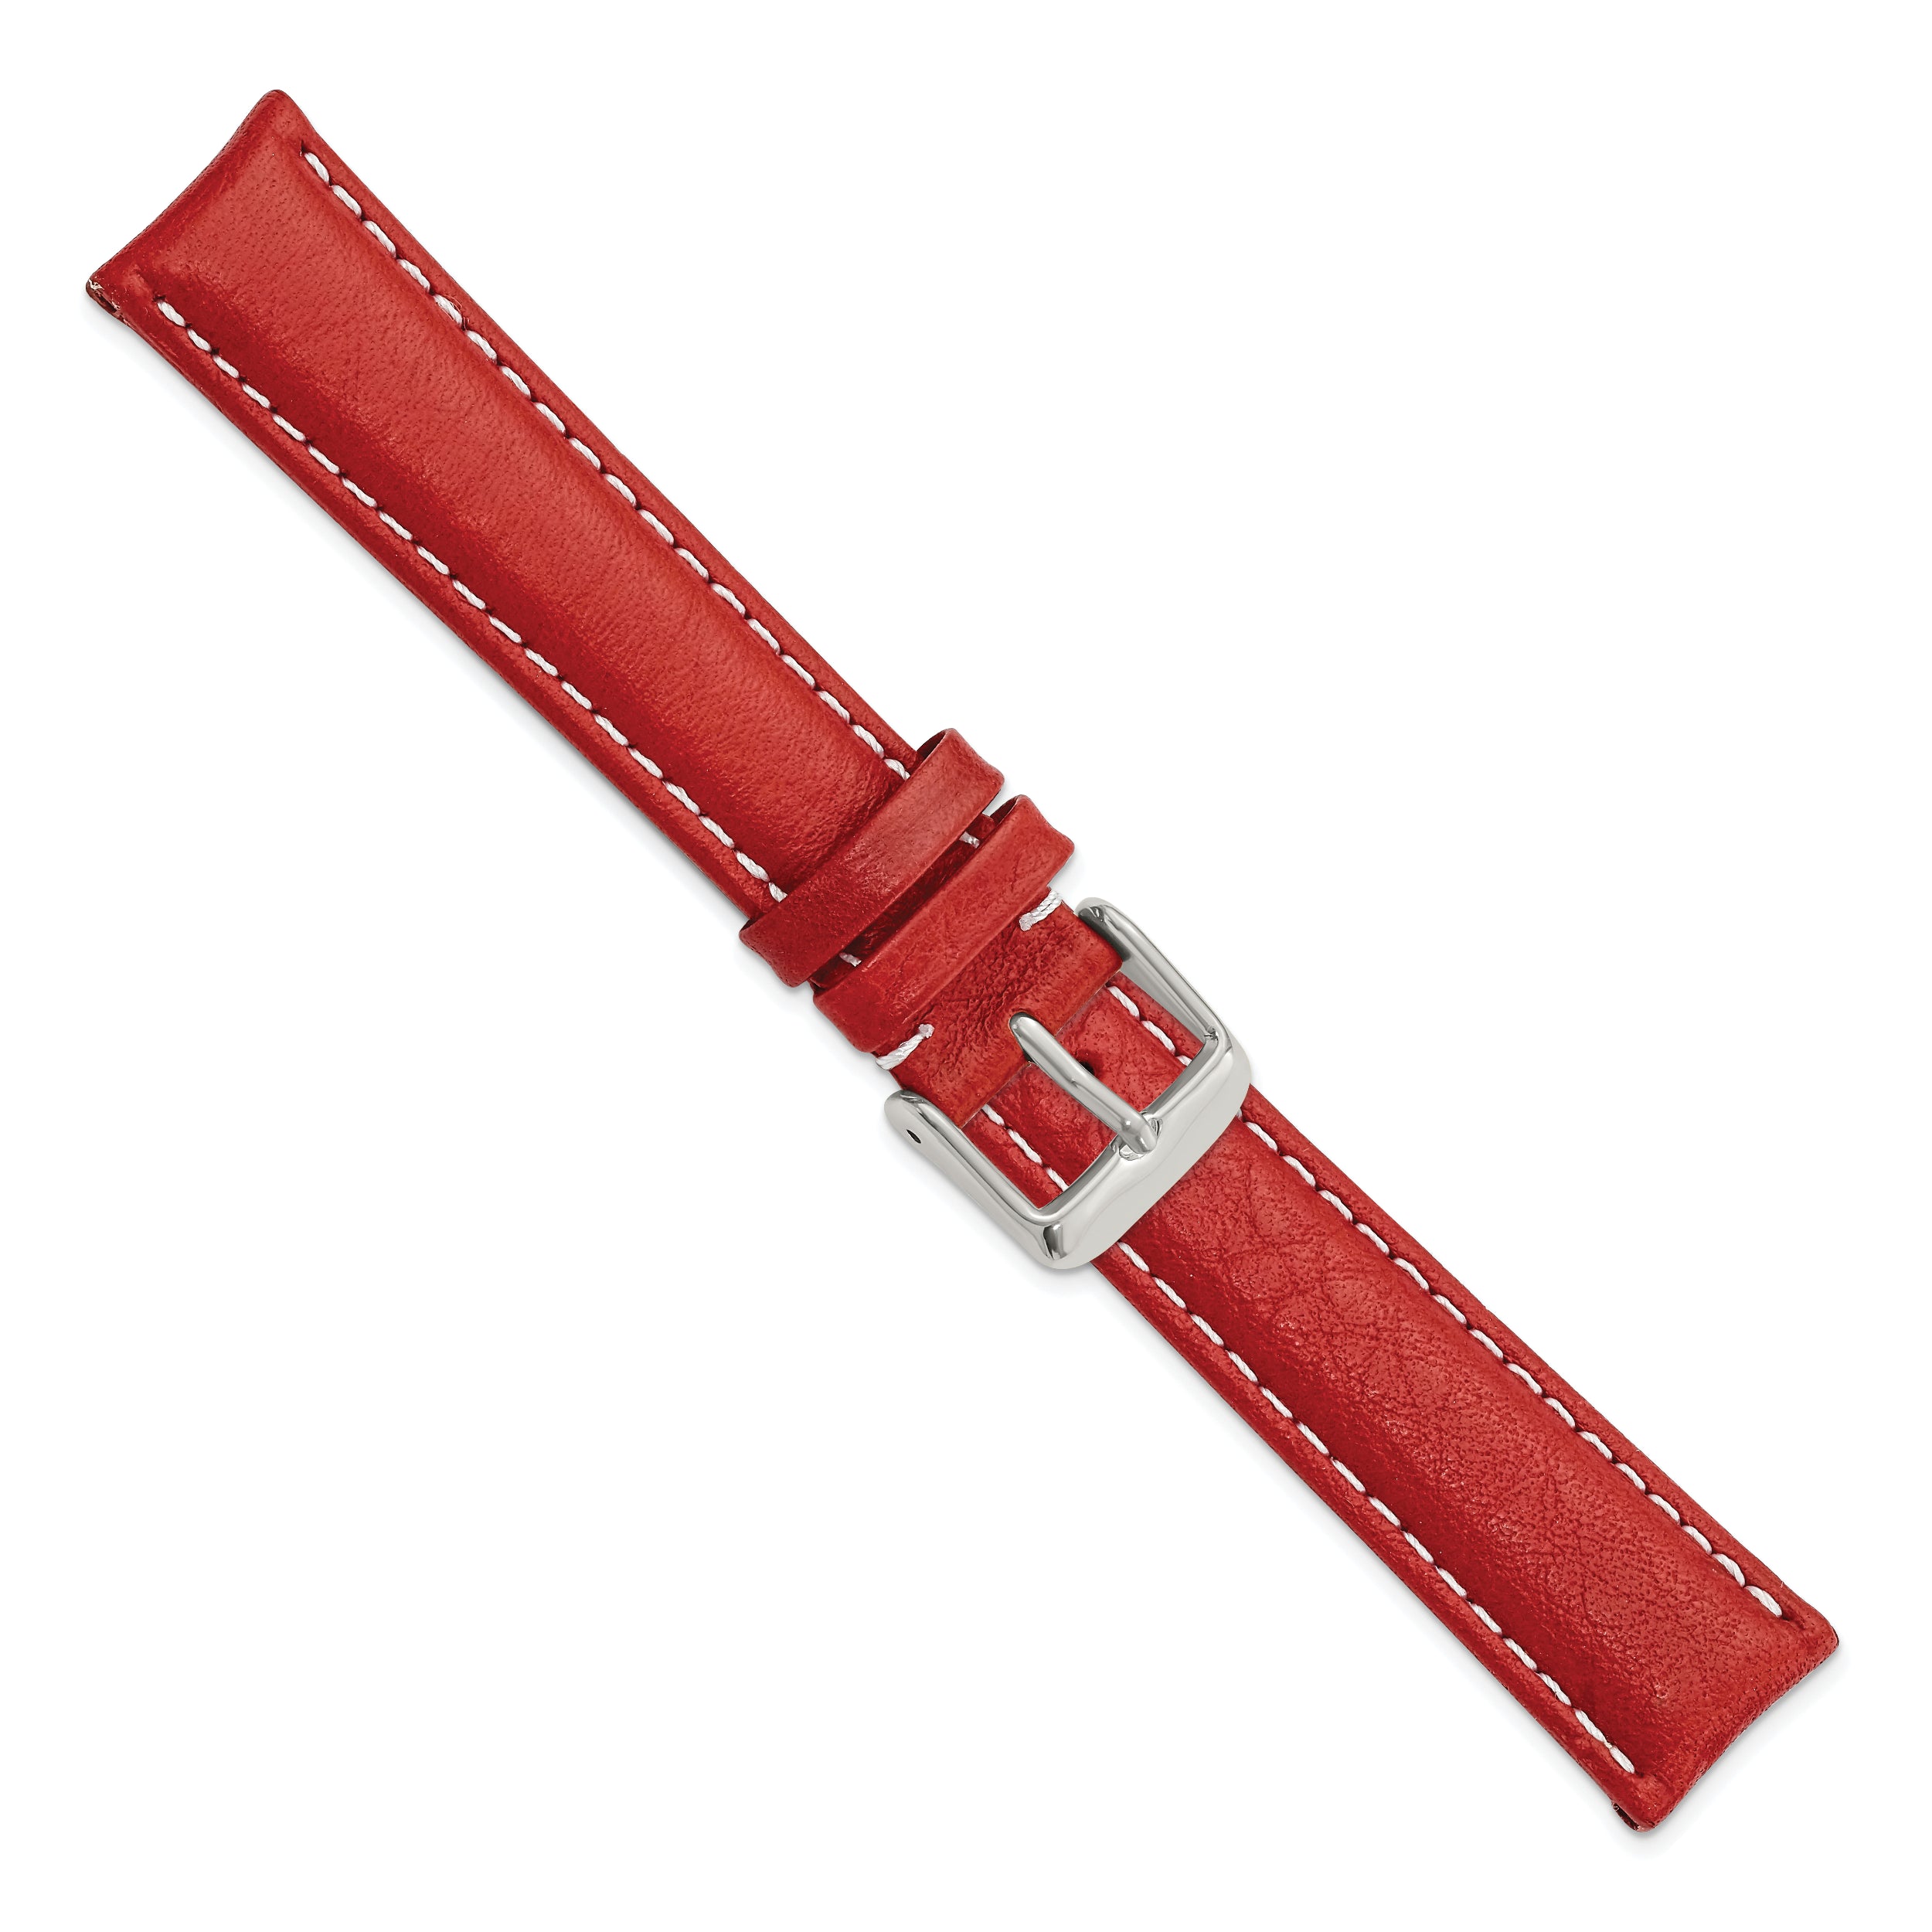 16mm Red Sport Leather with White Stitching and Silver-tone Buckle 7.5 inch Watch Band